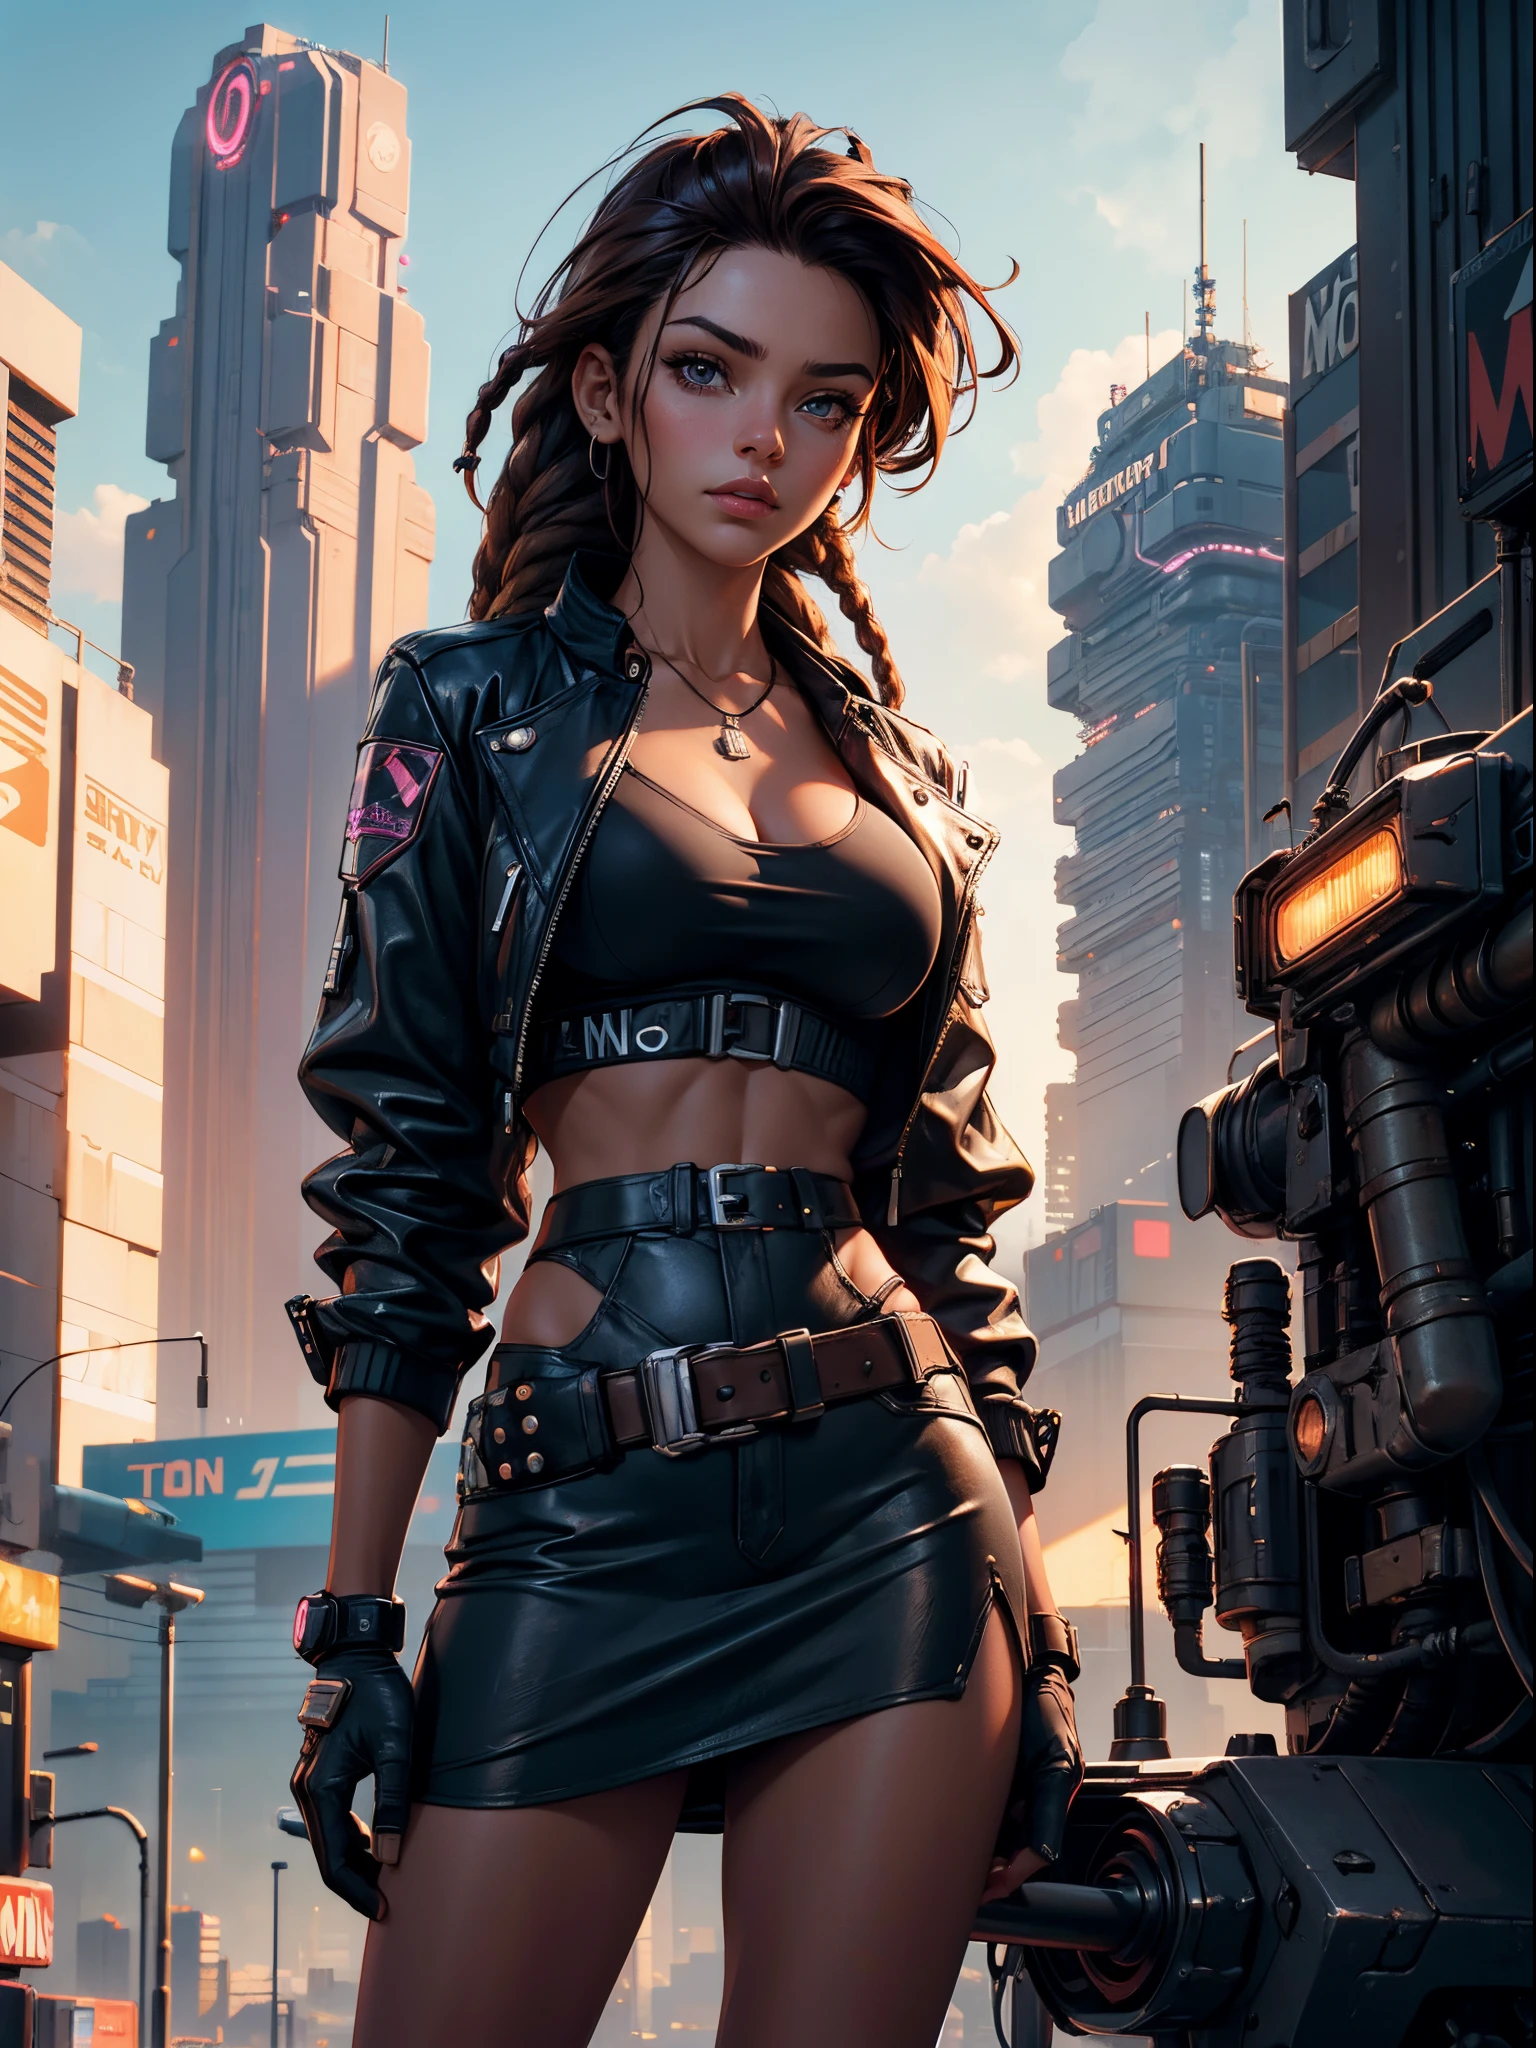 (​masterpiece), (top-quality), sunset, natural lights, ,(realistic:1.5), 1girl, long brown hair, (dreadlocks:1.2), slim, looking at viewer, eye contact, stunningly beautiful 20 years old mexican girl, cyberpunk, sci-fi mercenary, detailed cyberpunk city in background, neon lights, industrial, leather jacket short_skirt, necklace, tattoos, cybernetic_implants, athletic body, toned midriff, cleavage, large breasts, upper body, mid shot, masterpiece, detailed, mature, bright colors, high saturation, stunningly beautiful girl, dark brown eyes, dark brown hair, multi-colored hair, tanned, synthwave, enanched_beauty, precise hands, confident look、determined, bravery, Clear eyes, Shining eyes,, ultra-definition, Top resolution,  soft lightning